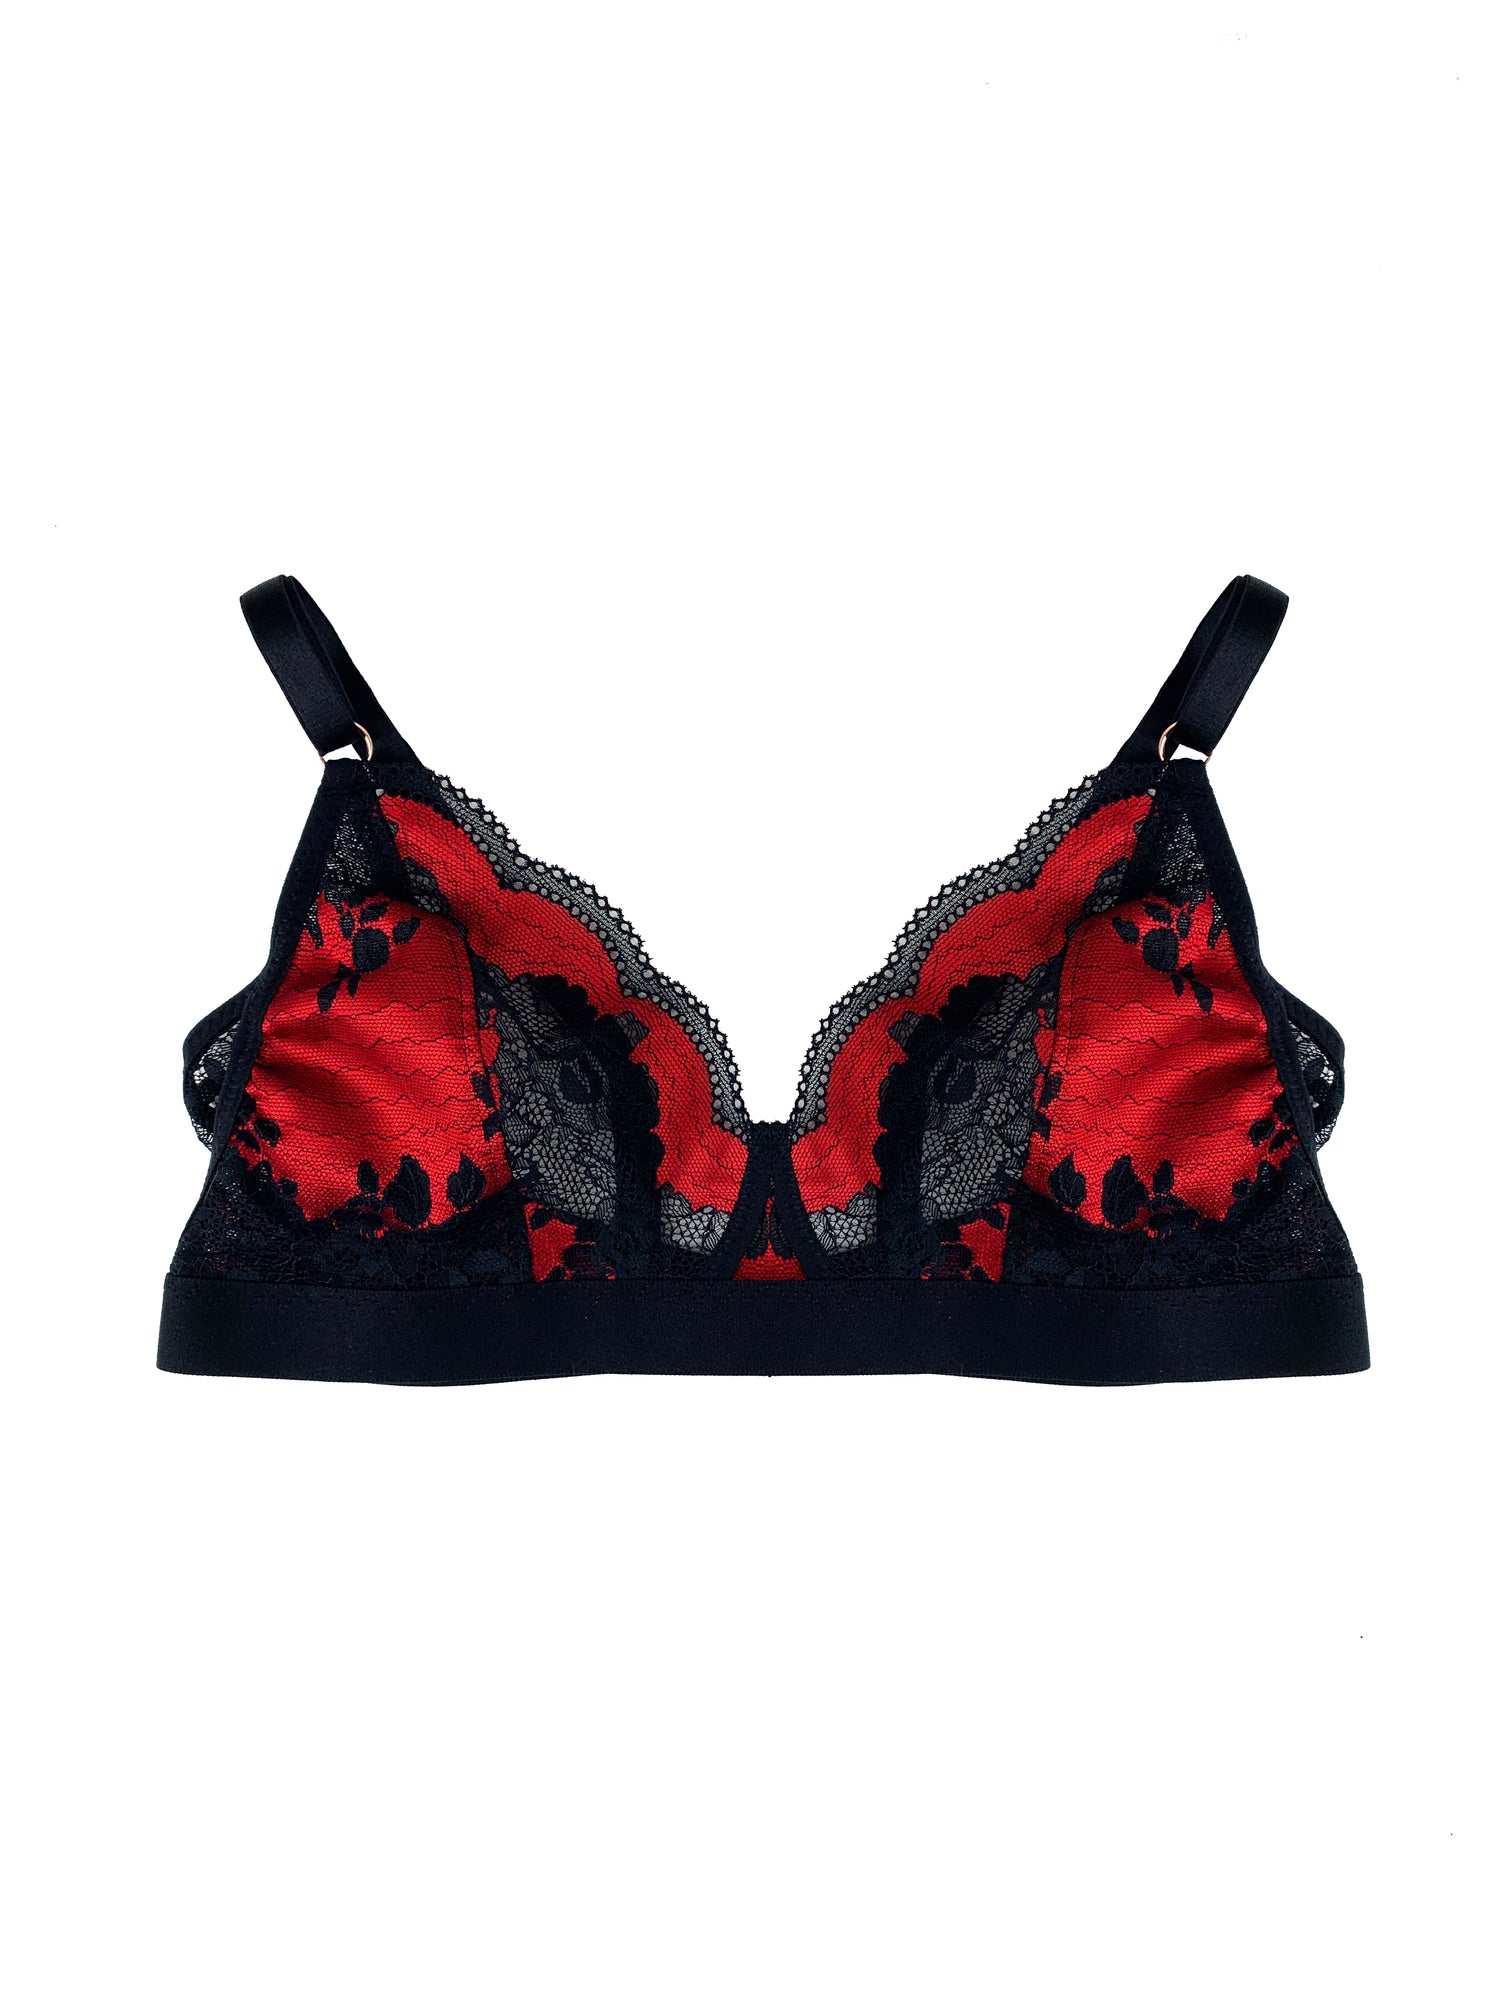 Black and red bralette with scalloped detail